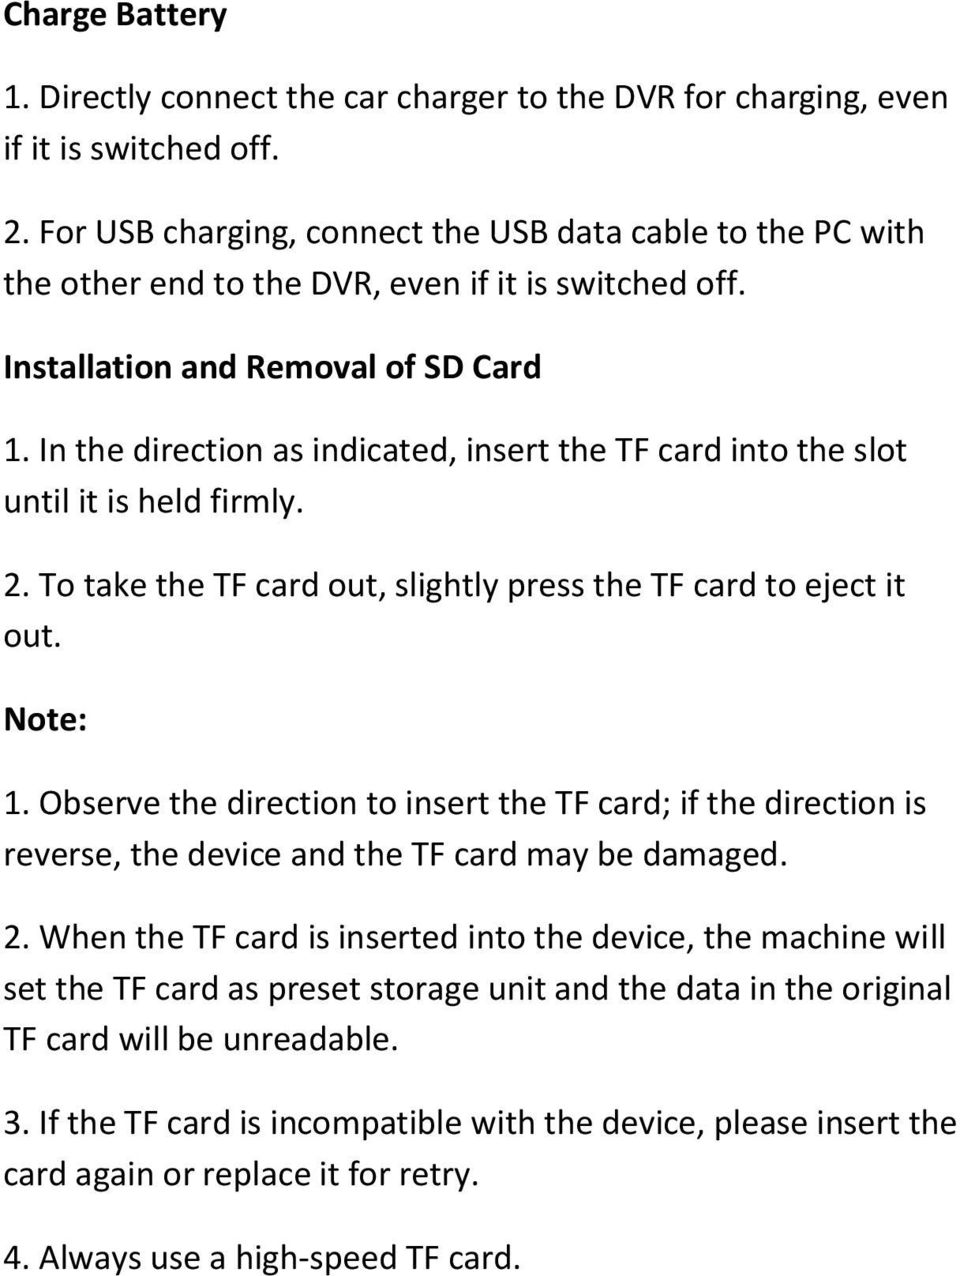 In the direction as indicated, insert the TF card into the slot until it is held firmly. 2. To take the TF card out, slightly press the TF card to eject it out. Note: 1.